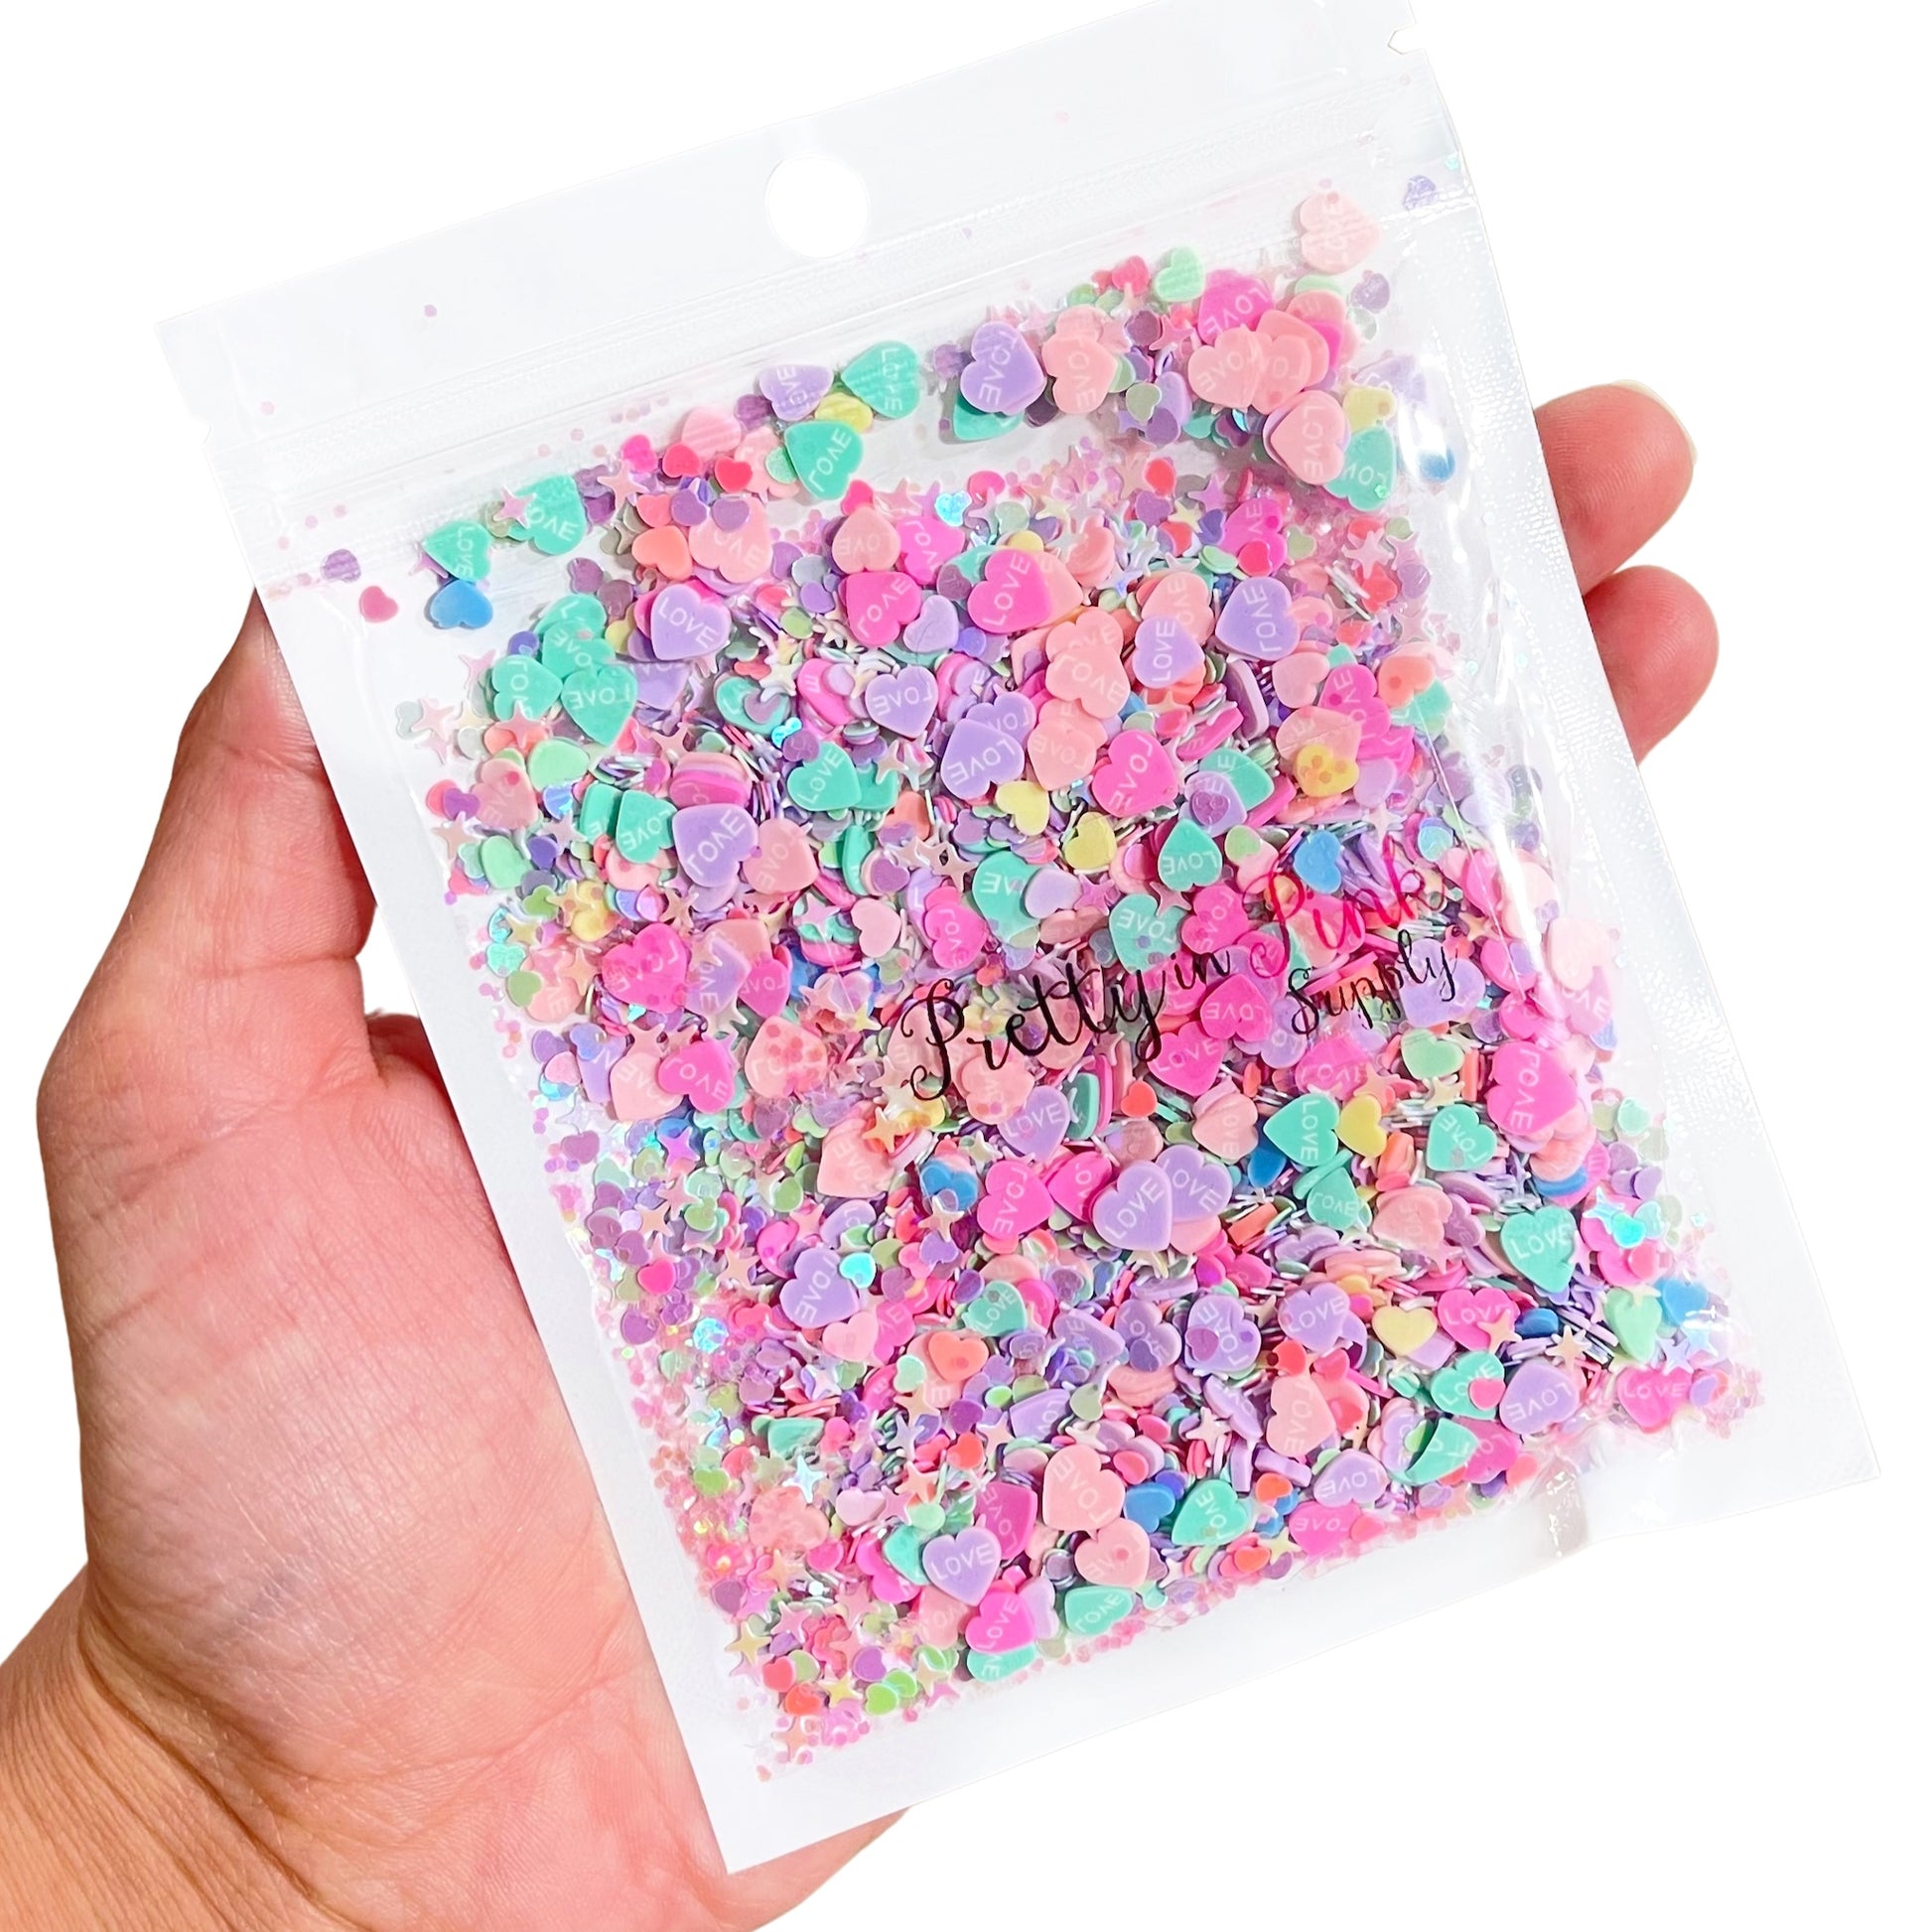 Hand holding bag of pastel heart polymer clay slice mix and sequin mix.